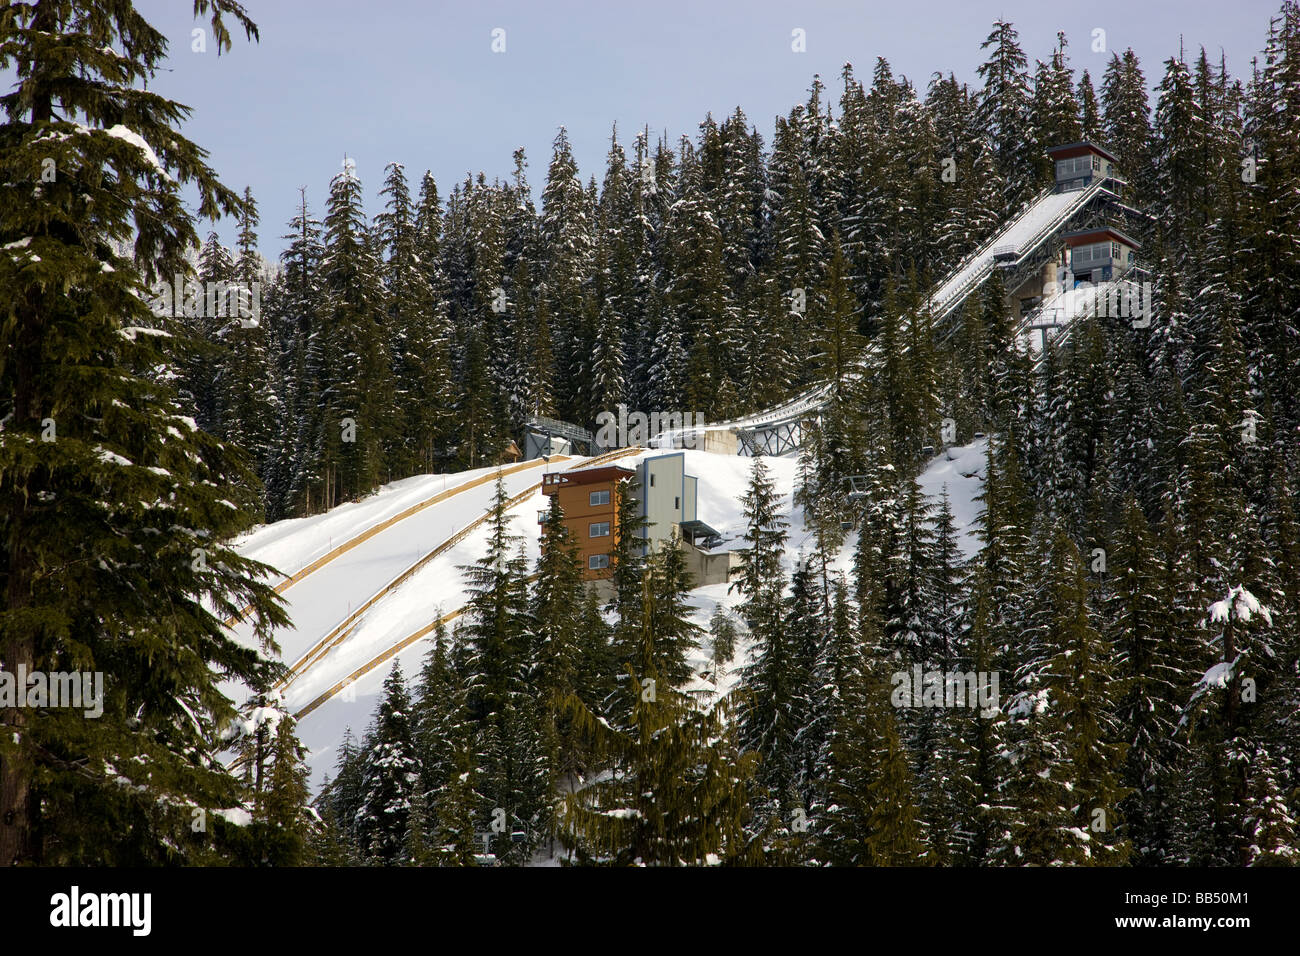 Ski jumping hill at the Whistler Olympic Park 2010 Vancouver Winter Olympics Whistler British Columbia Canada Stock Photo